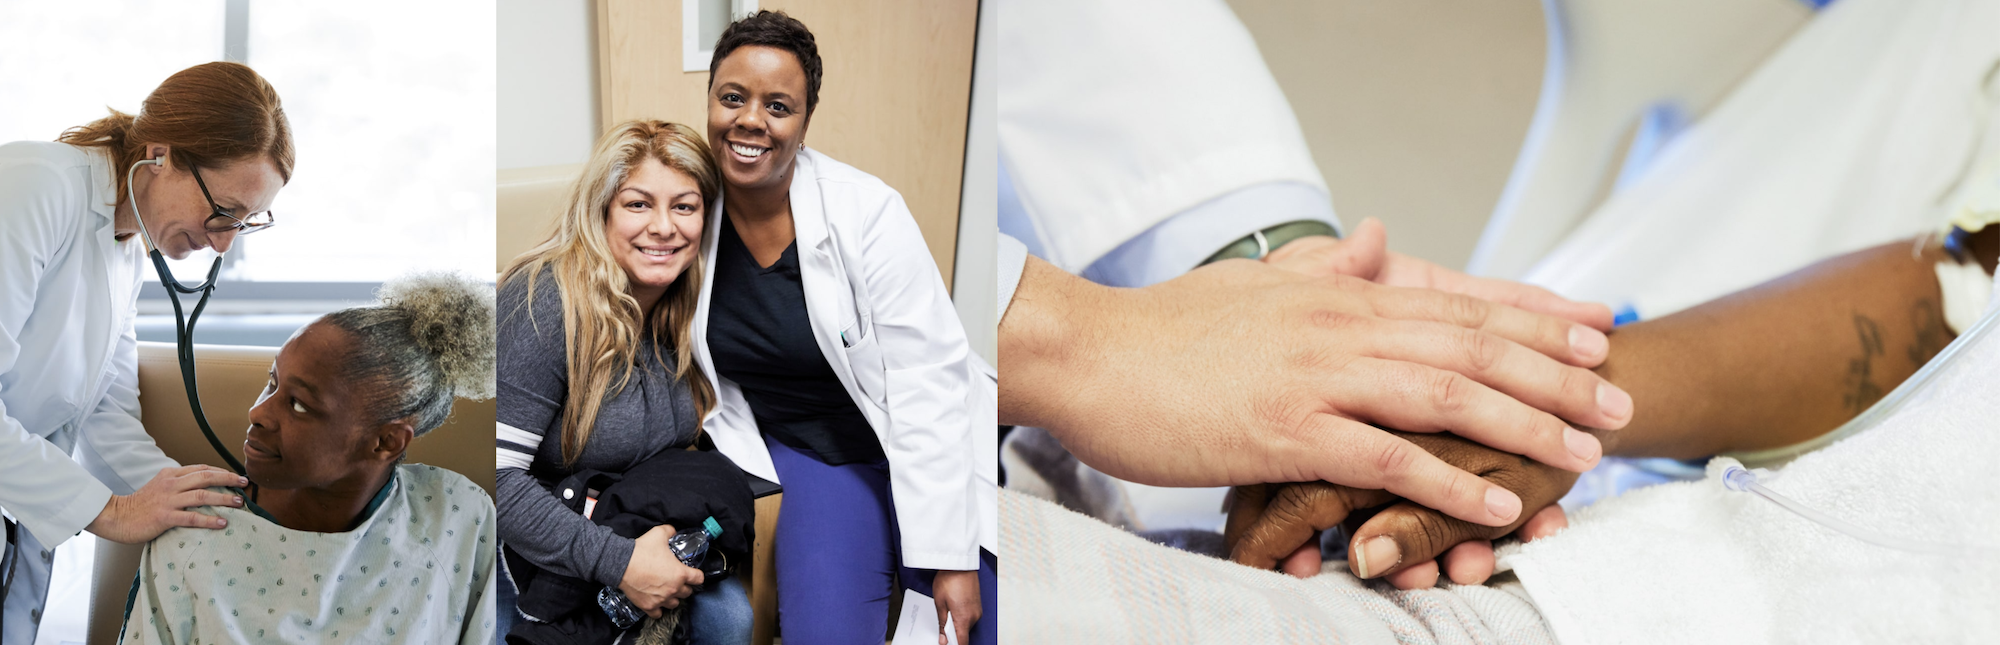 Collage of white female doctor using stethoscope on Black female patient, Black female nurse sitting side by side with female patient smiling, and close up of a doctor's hand holding a patient's